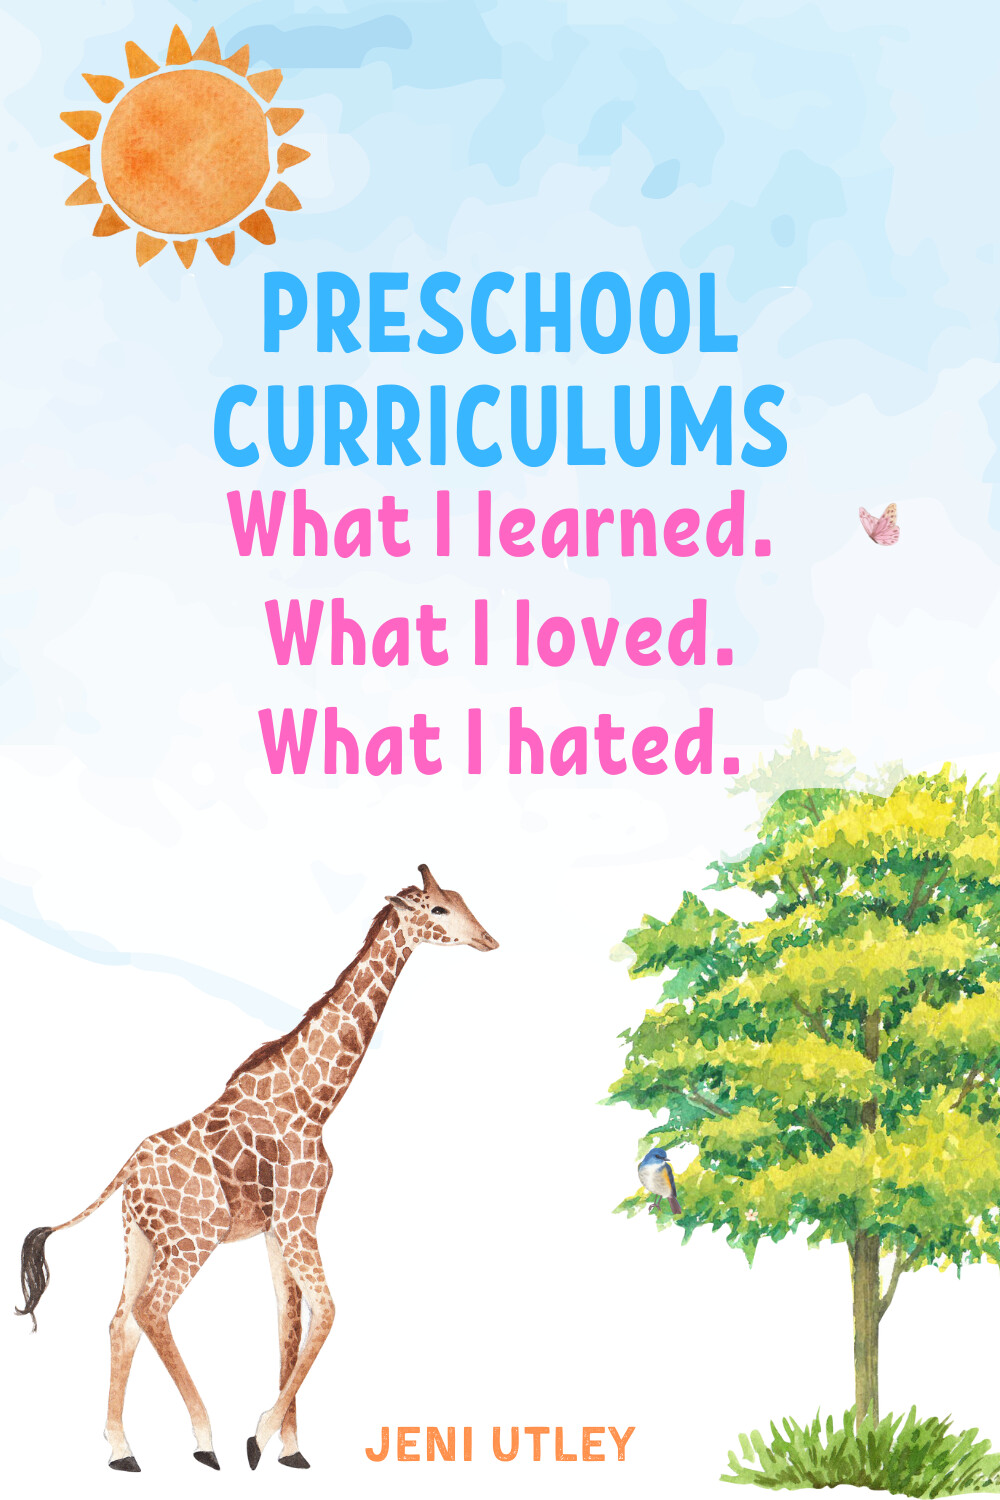 PRESCHOOL CURRICULUMS: What I learned, what I loved and what I hated.